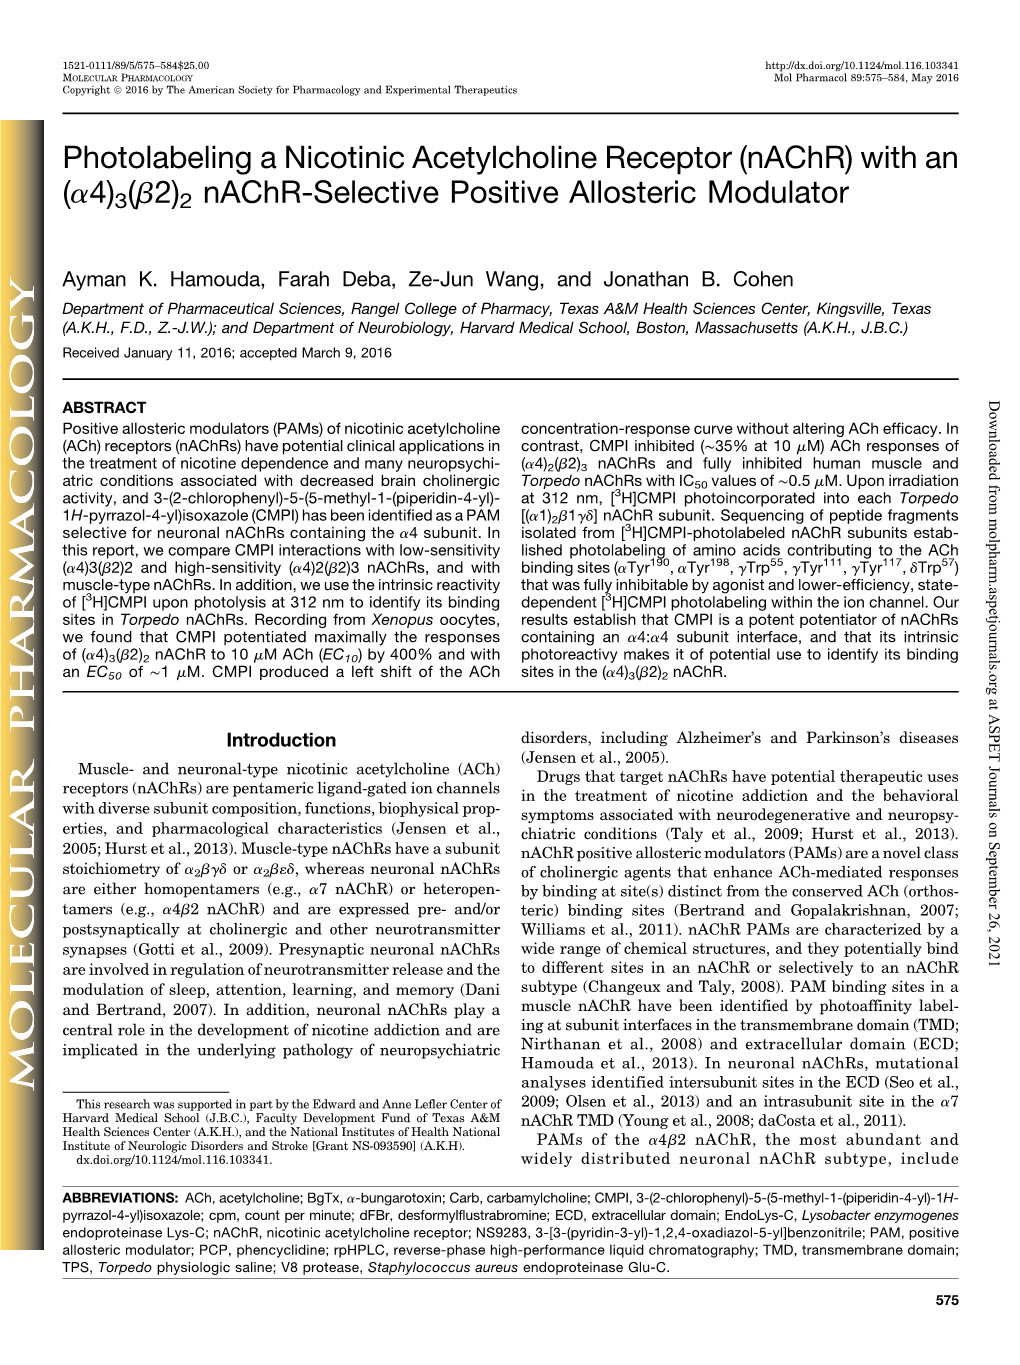 Photolabeling a Nicotinic Acetylcholine Receptor (Nachr) with an (A4)3(B2)2 Nachr-Selective Positive Allosteric Modulator